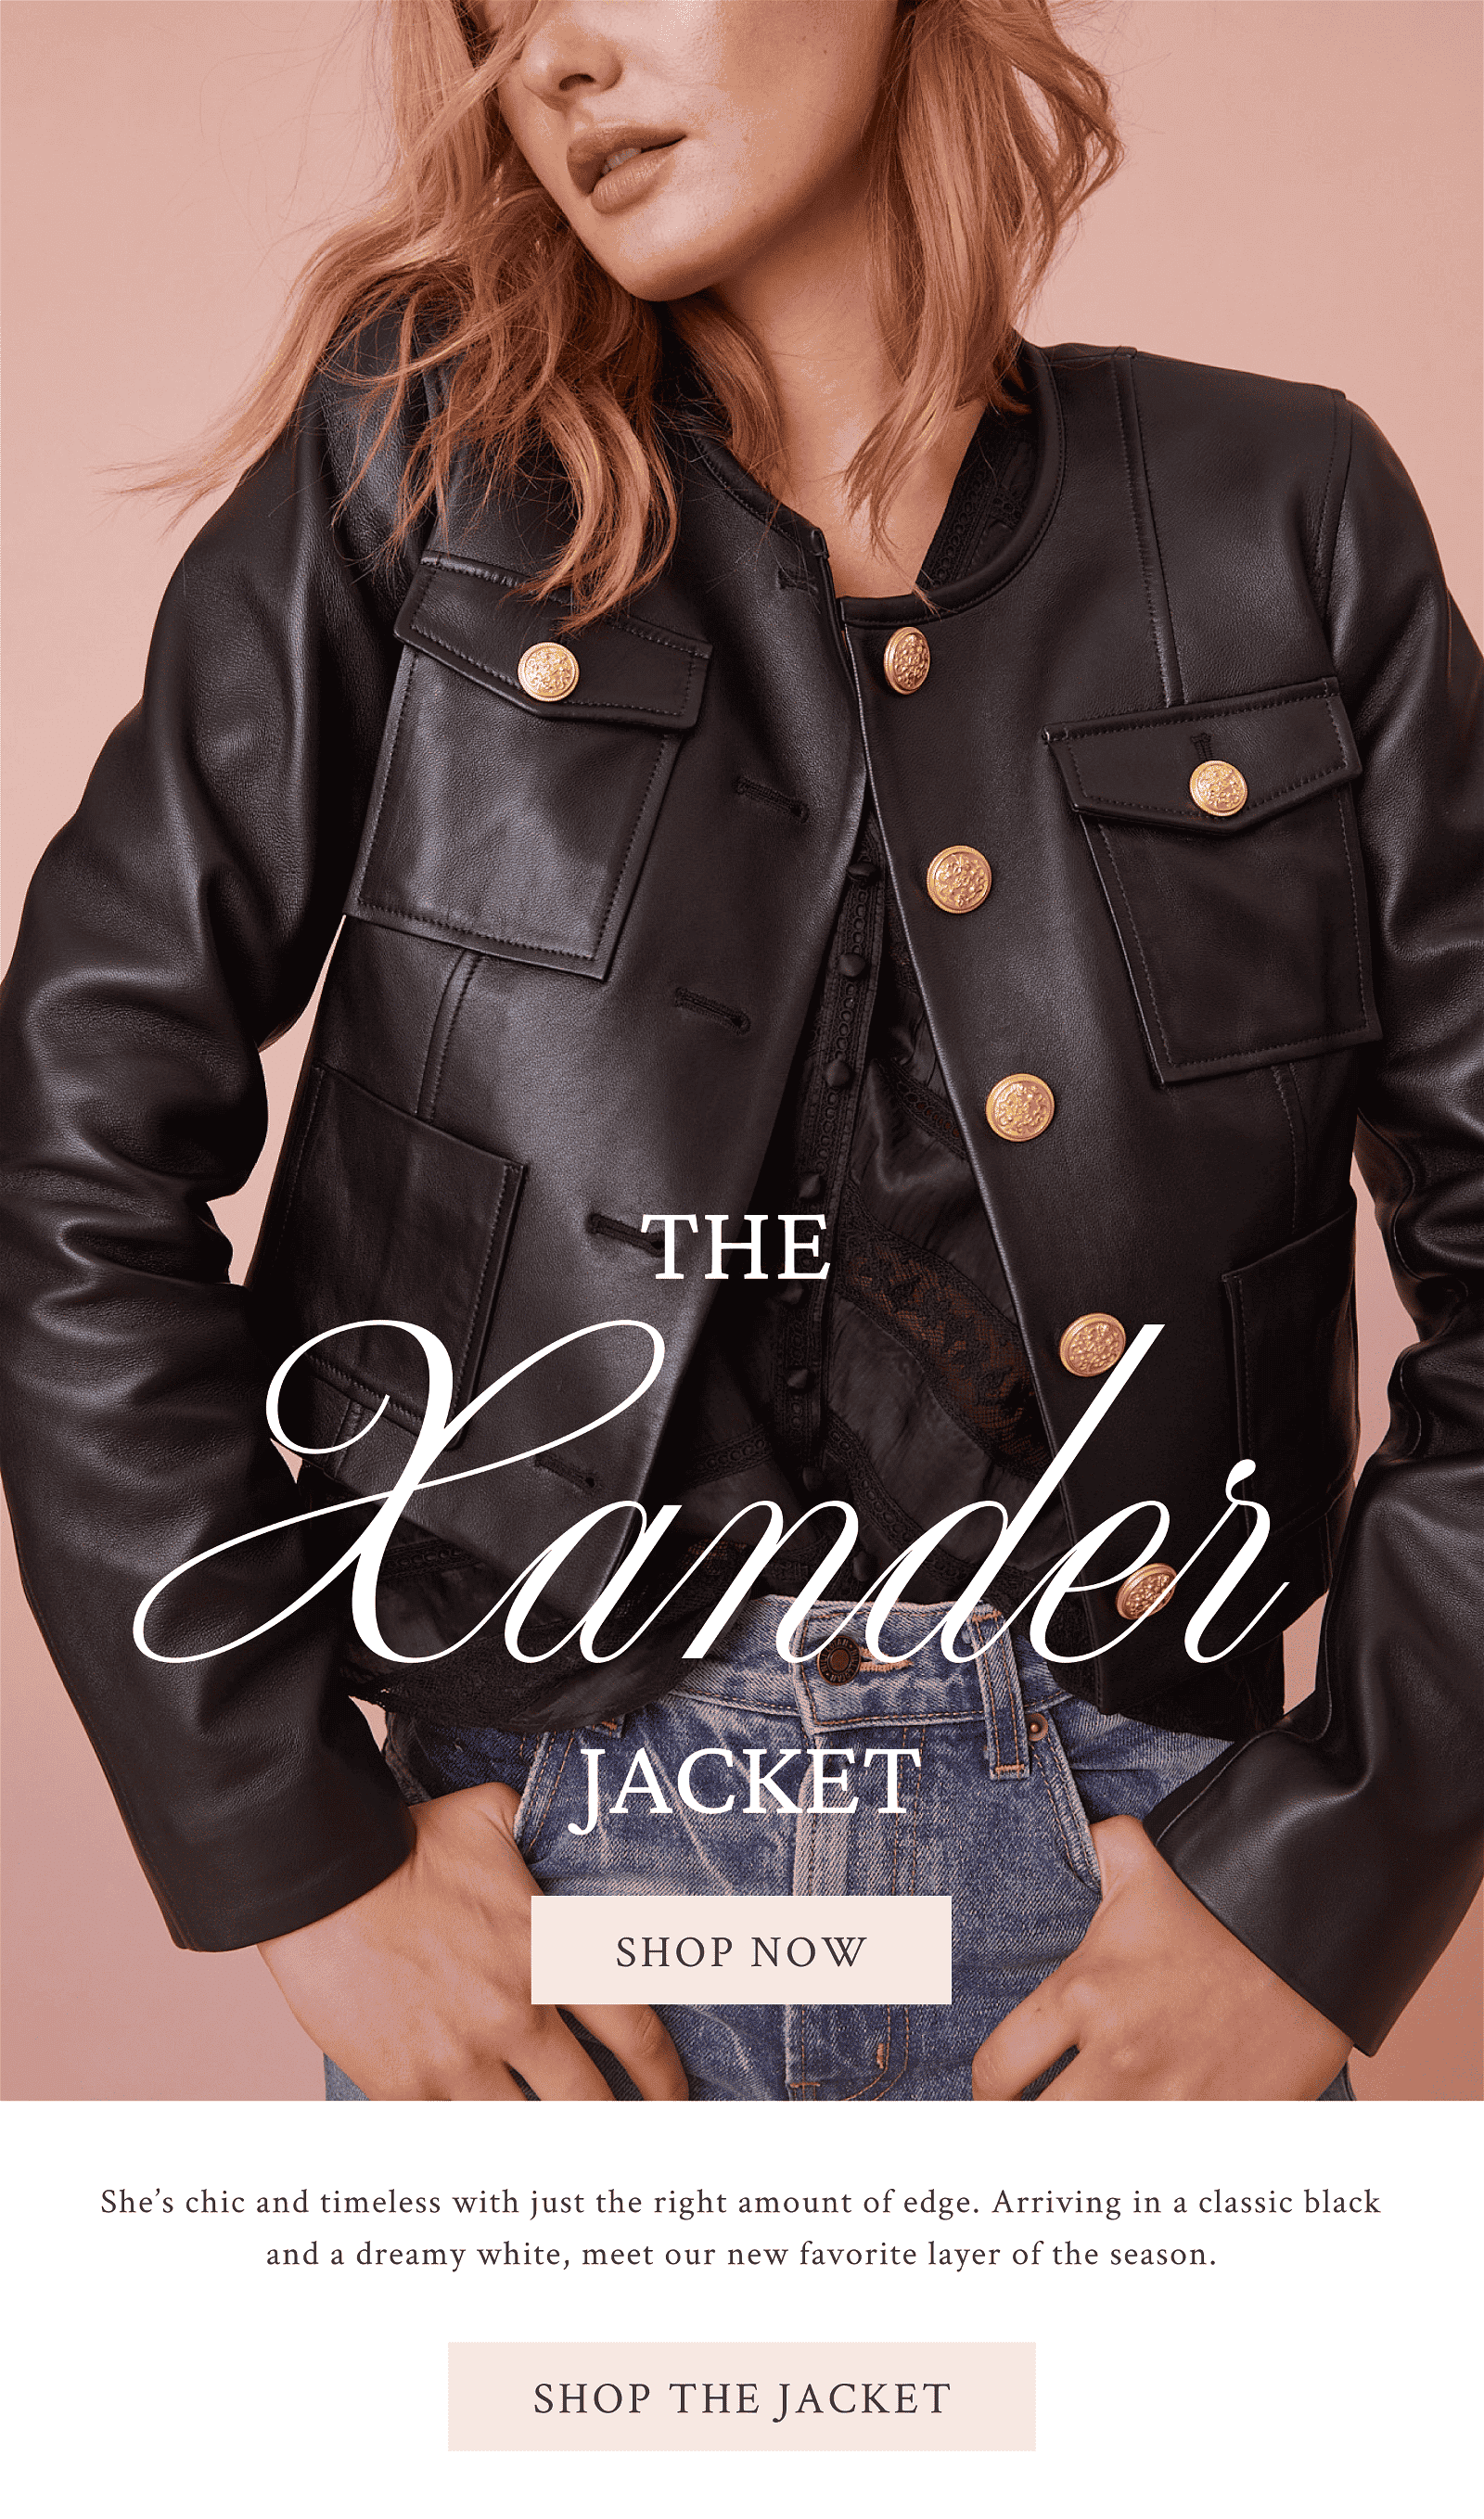 The Xander Jacket. She’s chic and timeless with just the right amount of edge. Arriving in a classic black and a dreamy white, meet our new favorite layer of the season.